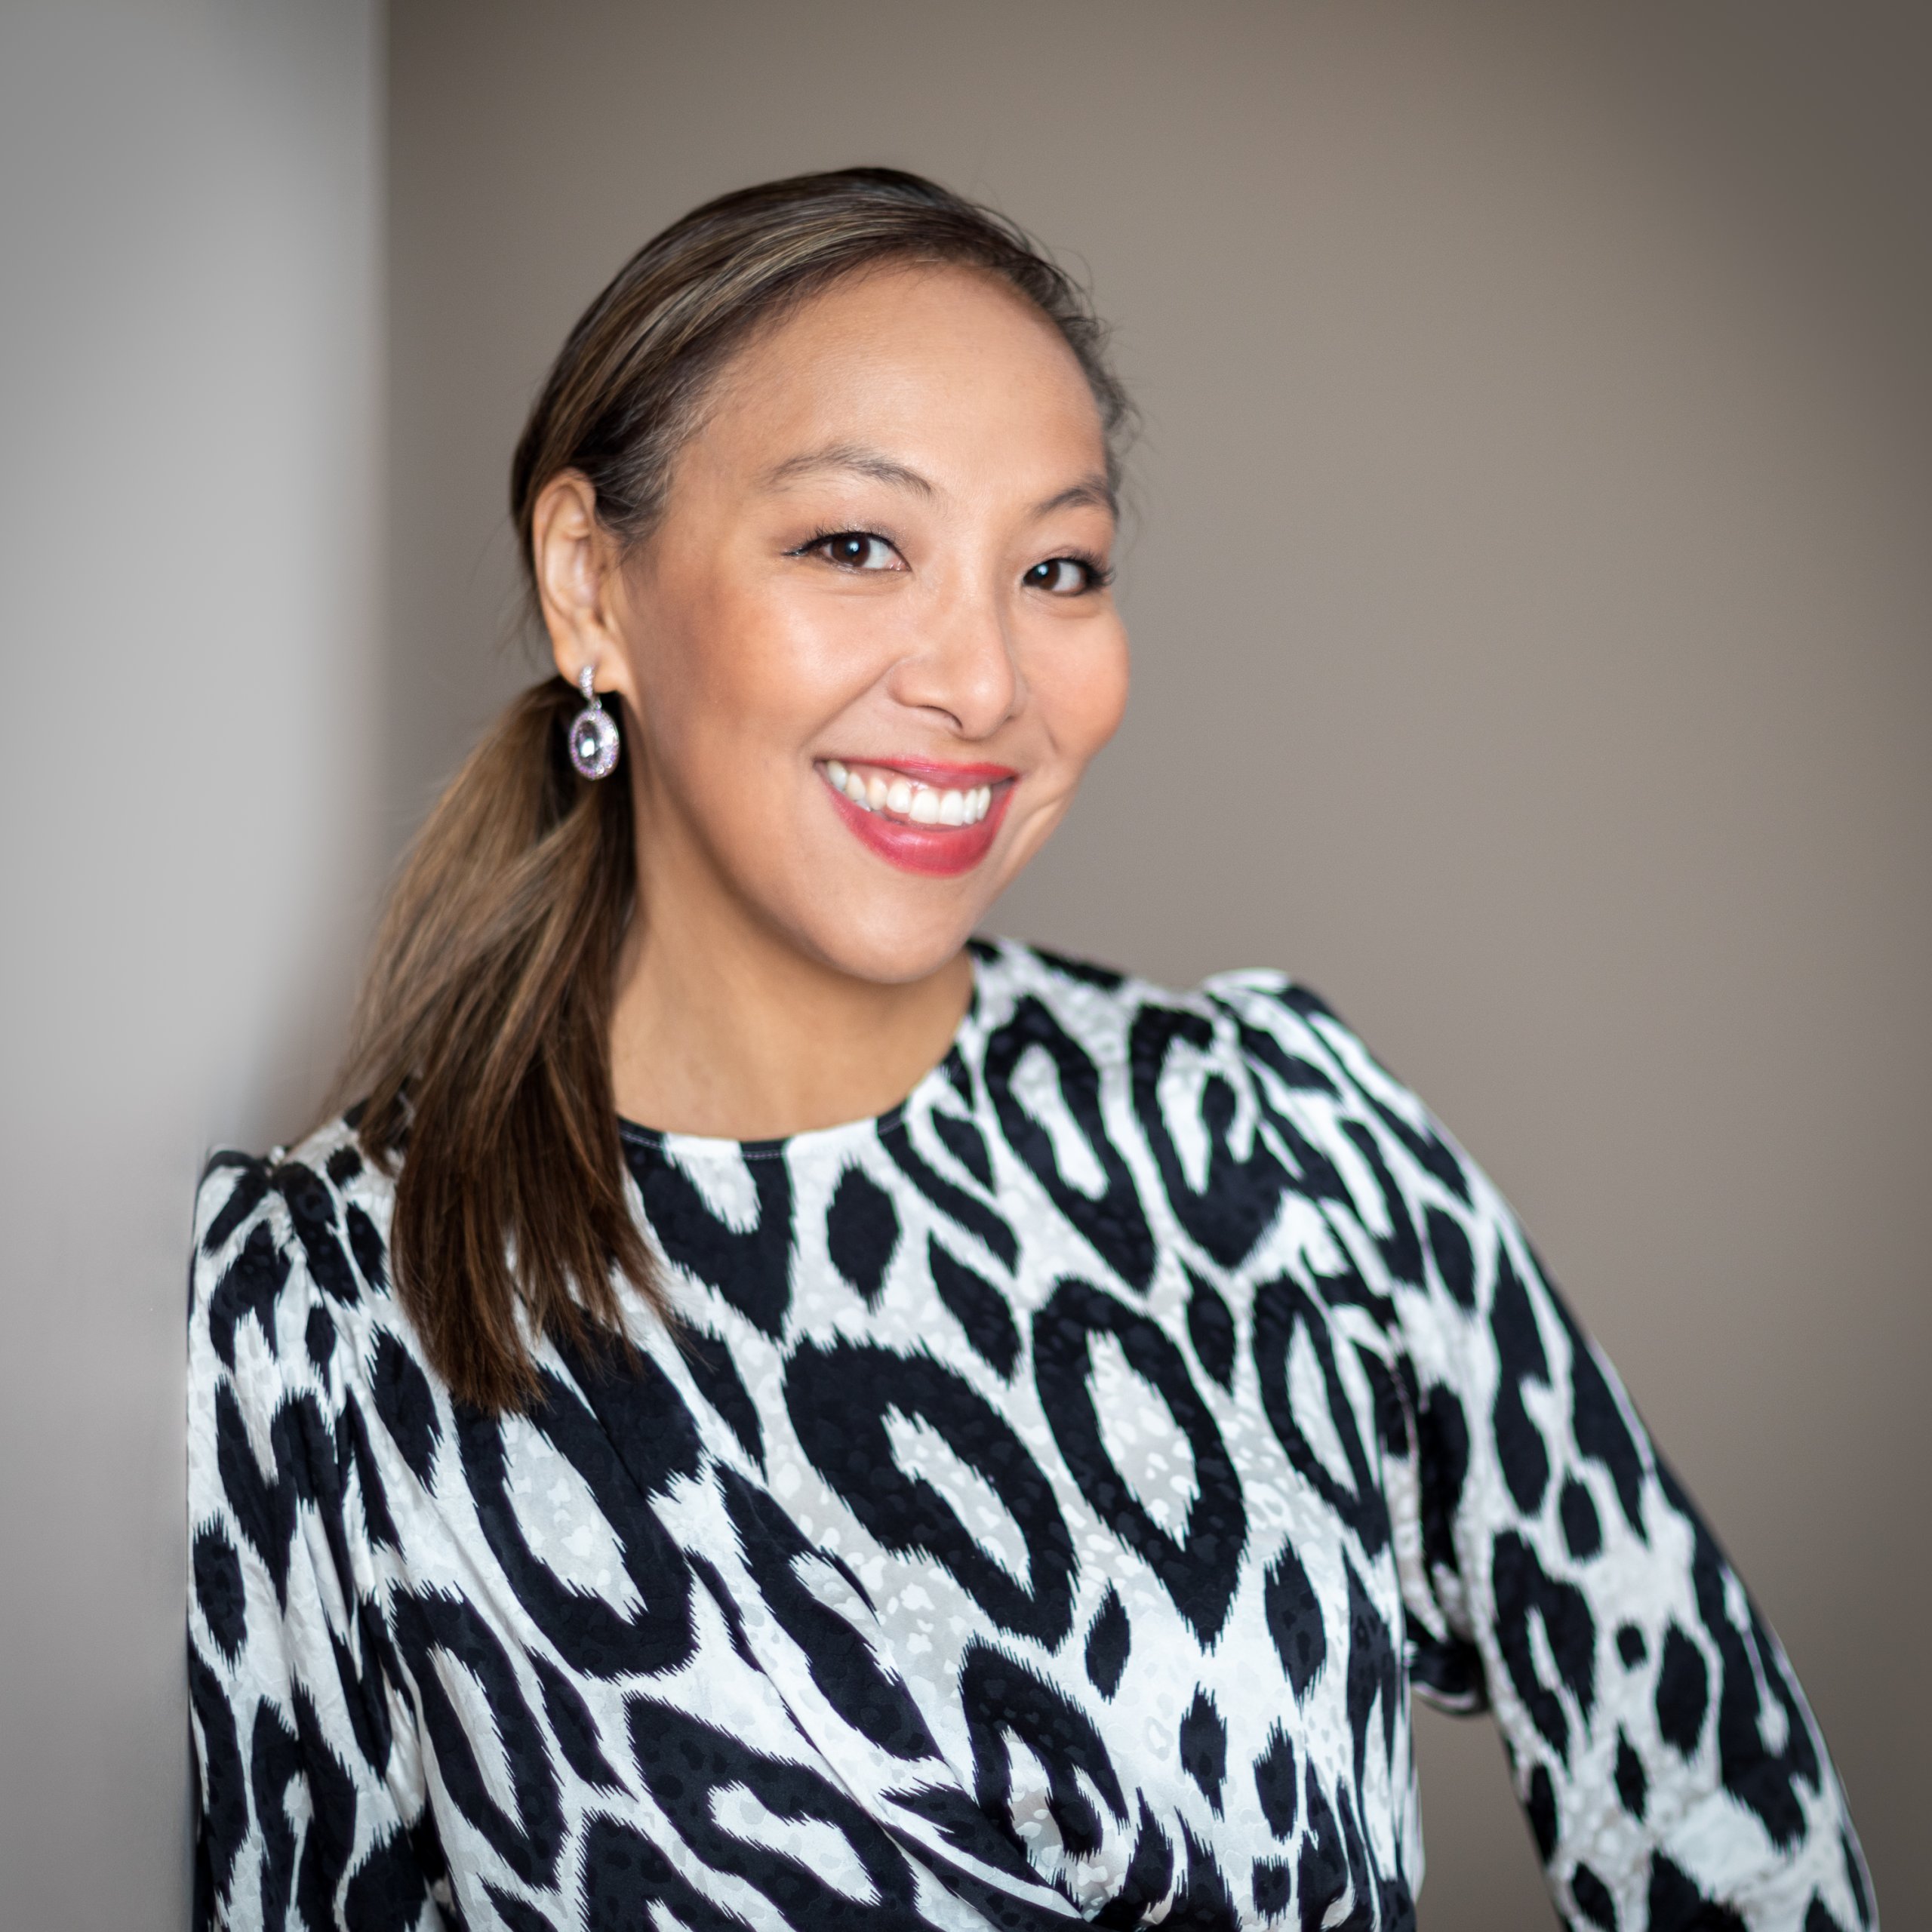 Small business owner Jacqueline Vong on how she manages cash flow